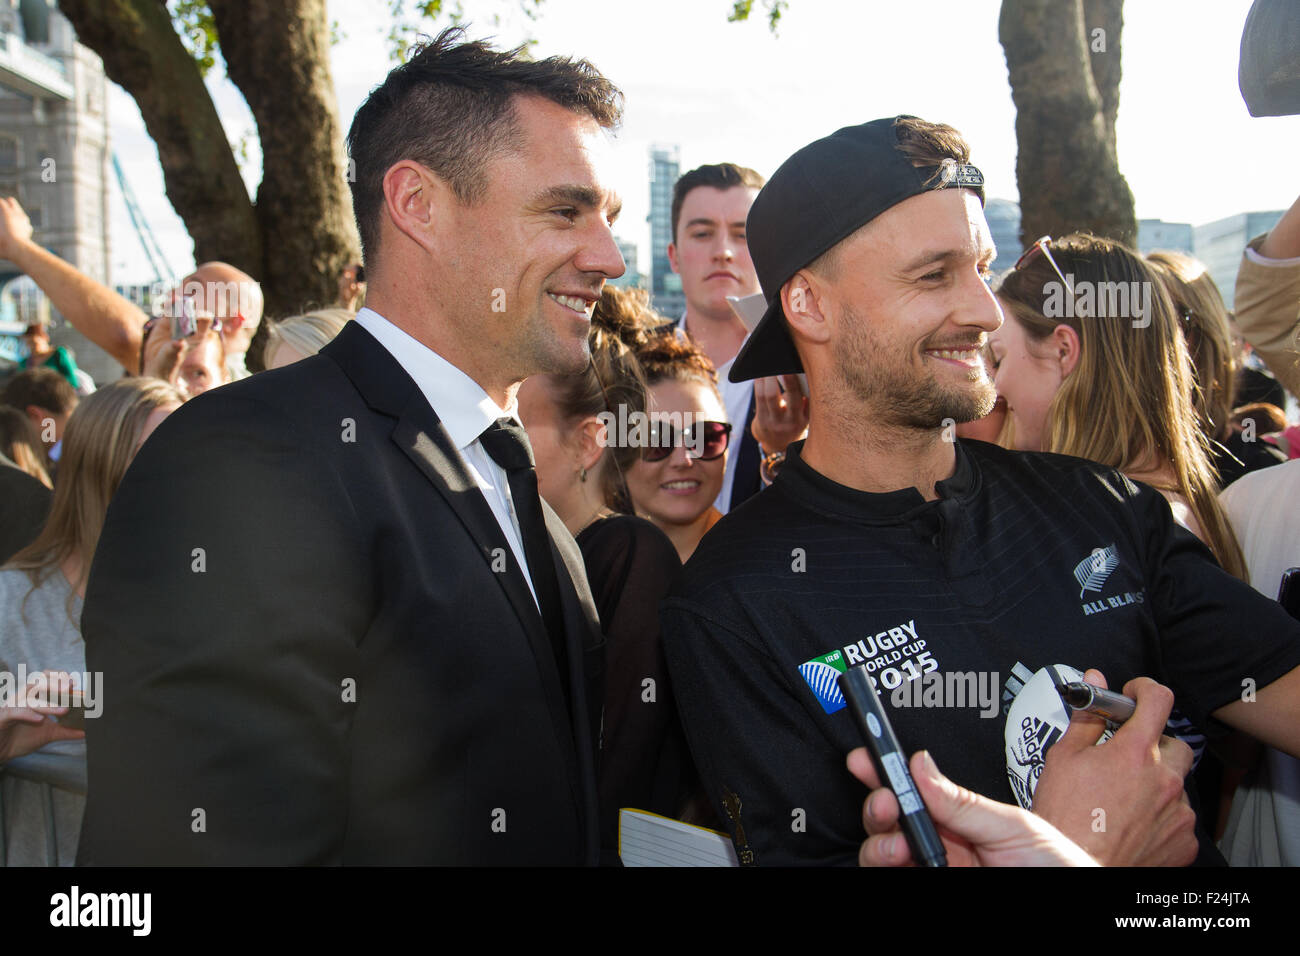 London, UK. 11th September 2015. Dan Carter poses for a picture with a fan at Tower Bridge after the welcoming ceremony for the New Zealand rugby team for the 2015 Rugby World Cup. 20 teams from around the world will be competing to win the Webb Ellis Cup and declared RWC 2015 winners. New Zealand are the current title holders, winning the trophy in 2011. Credit: Elsie Kibue / Alamy Live News Stock Photo